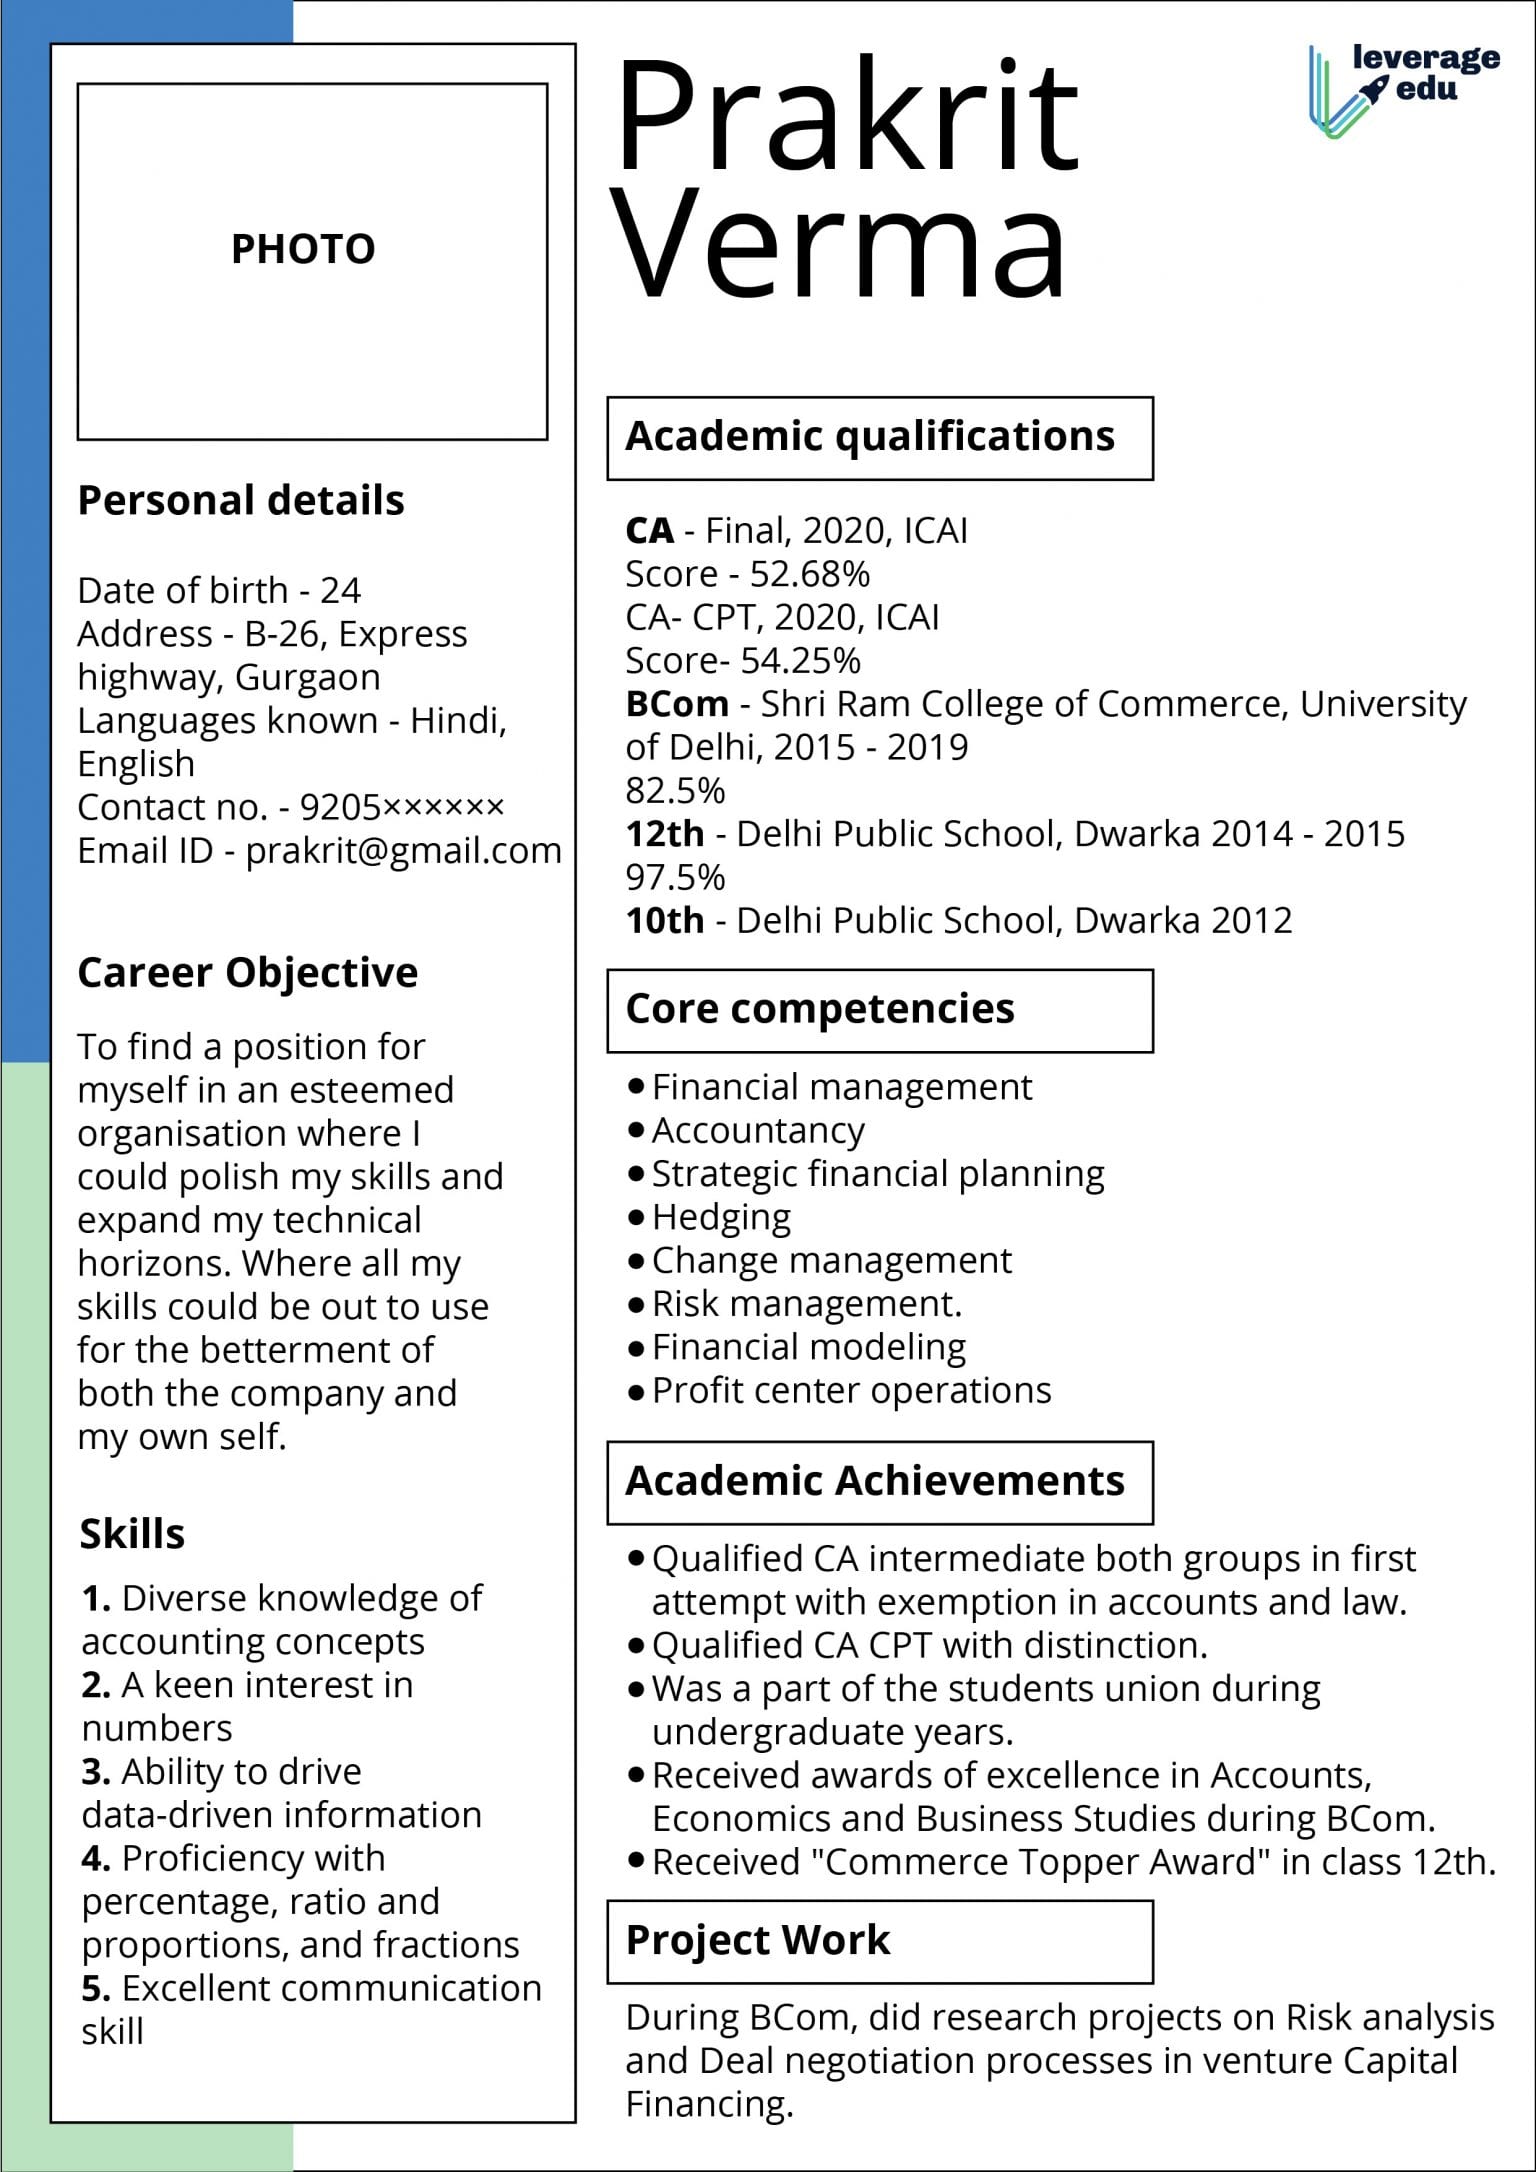 CA Fresher Resume With Latest Samples and Templates Leverage Edu